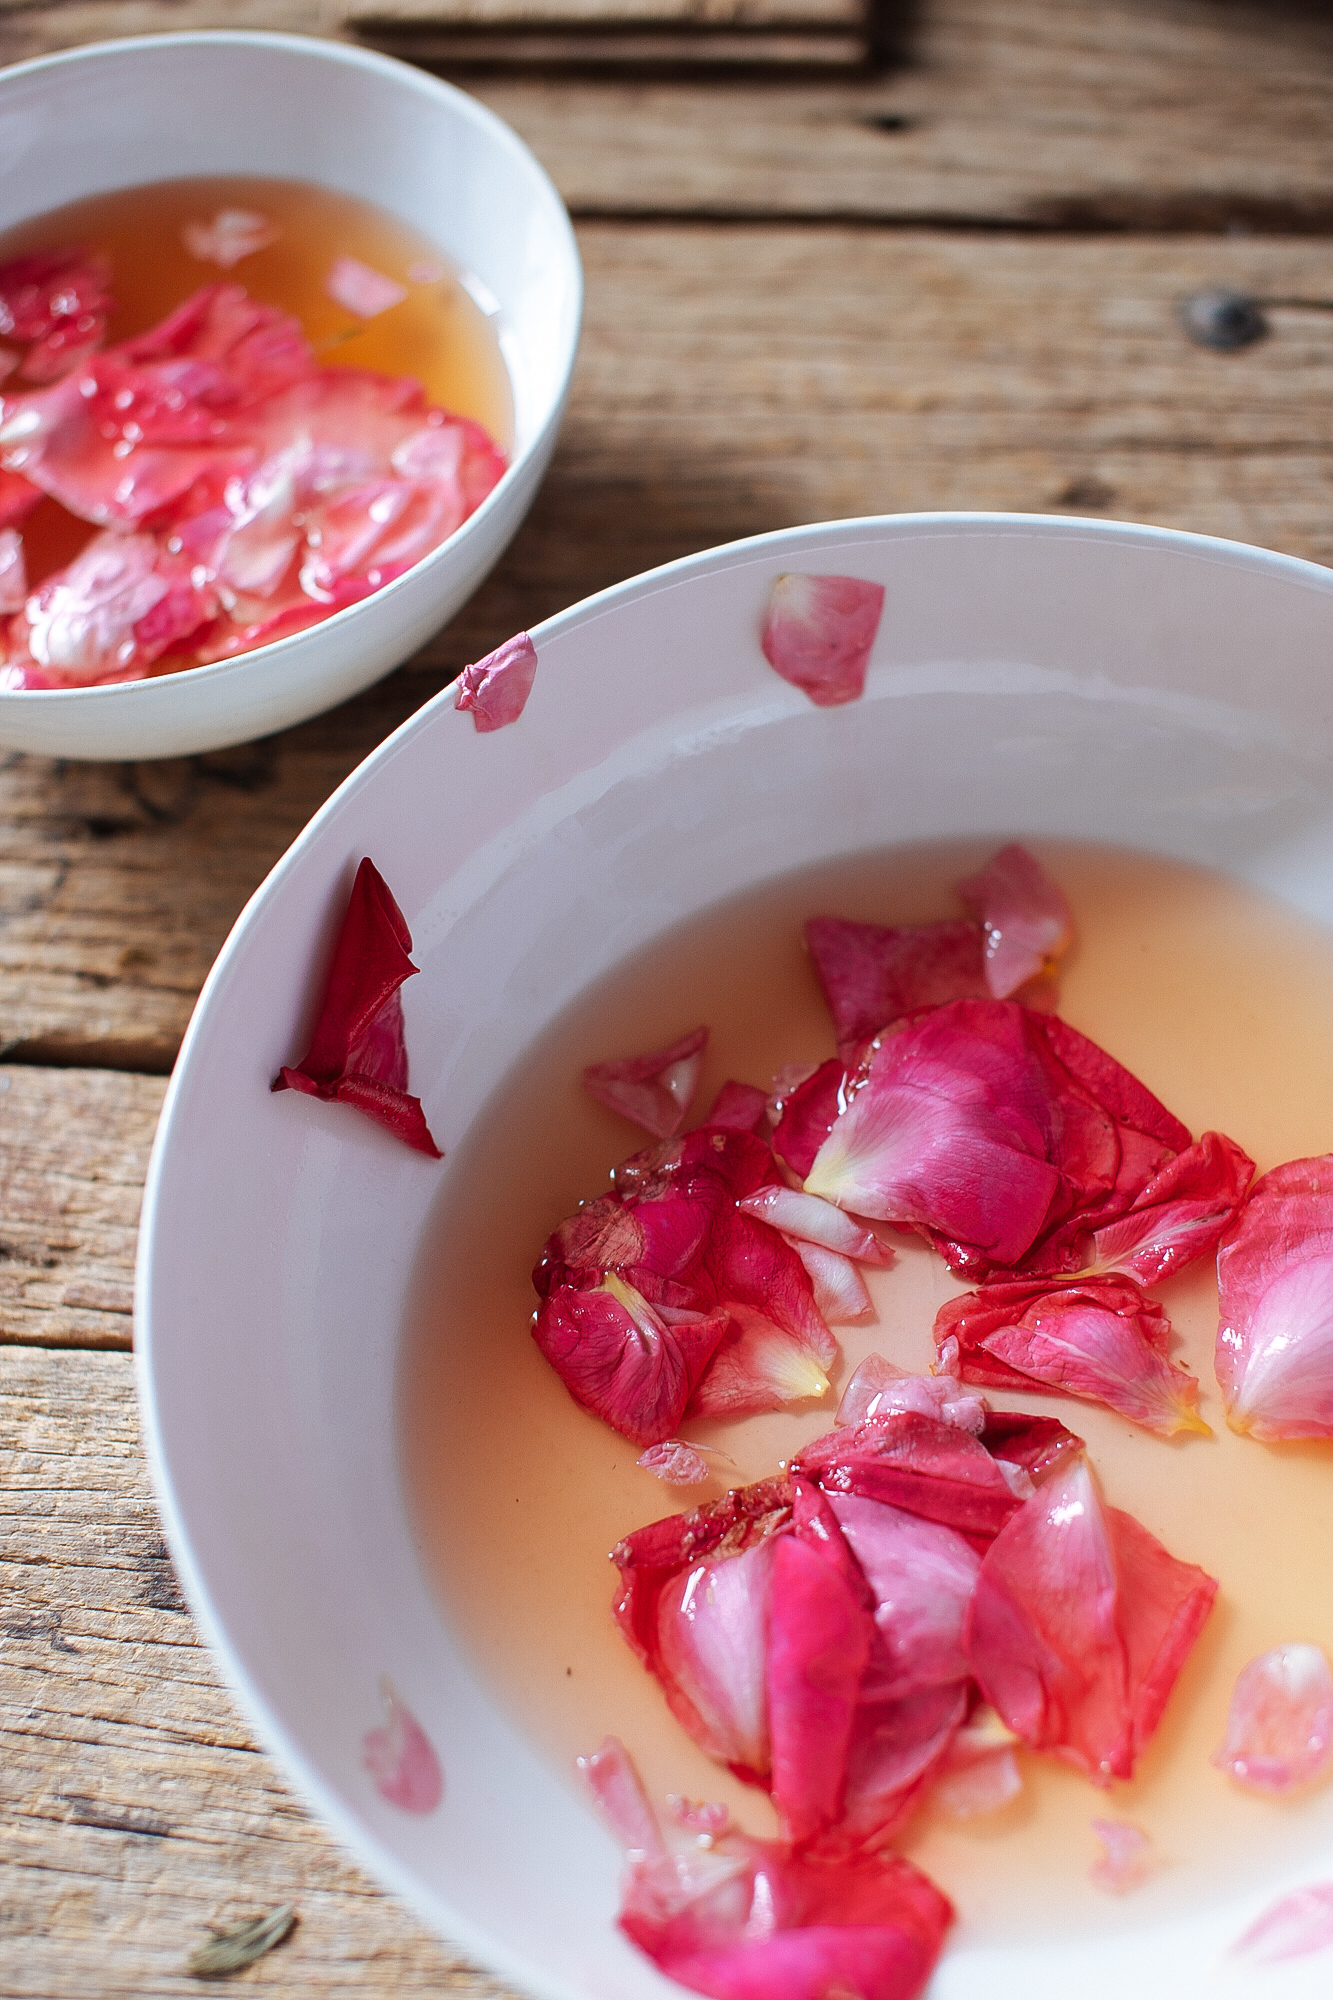 Pickled rose petals and see you next year! - Local is Lovely